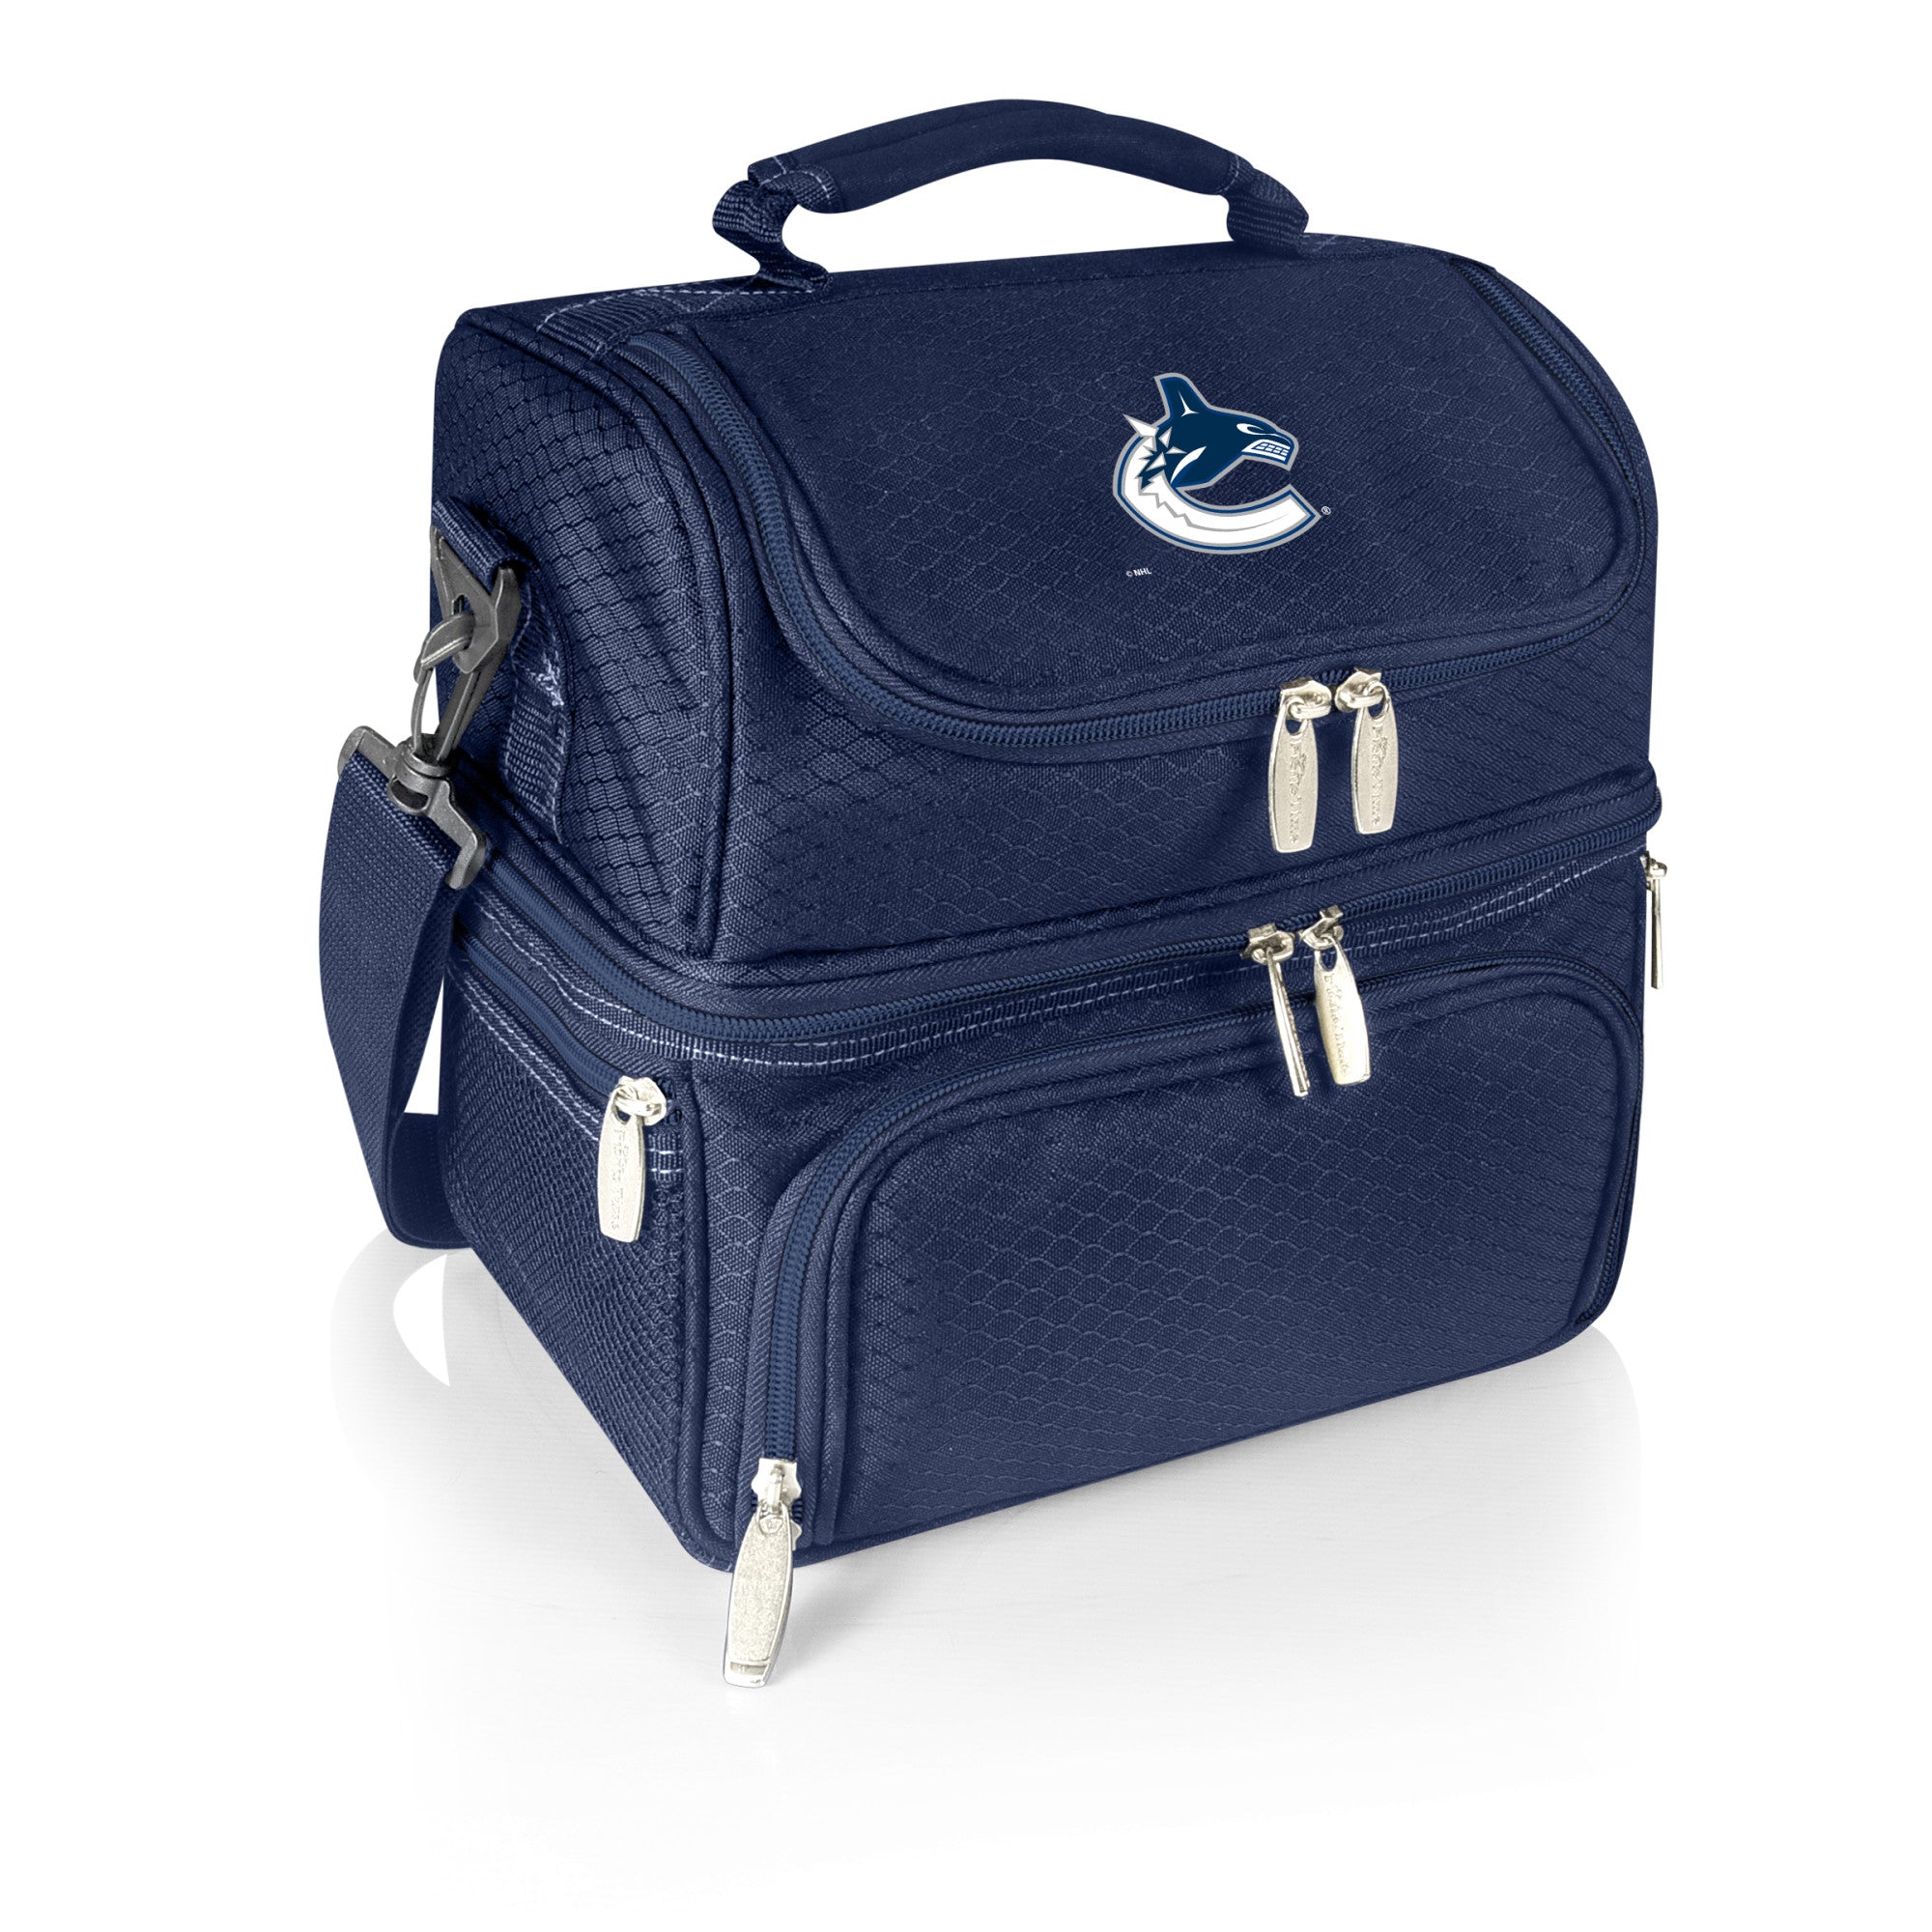 Vancouver Canucks - Pranzo Lunch Bag Cooler with Utensils